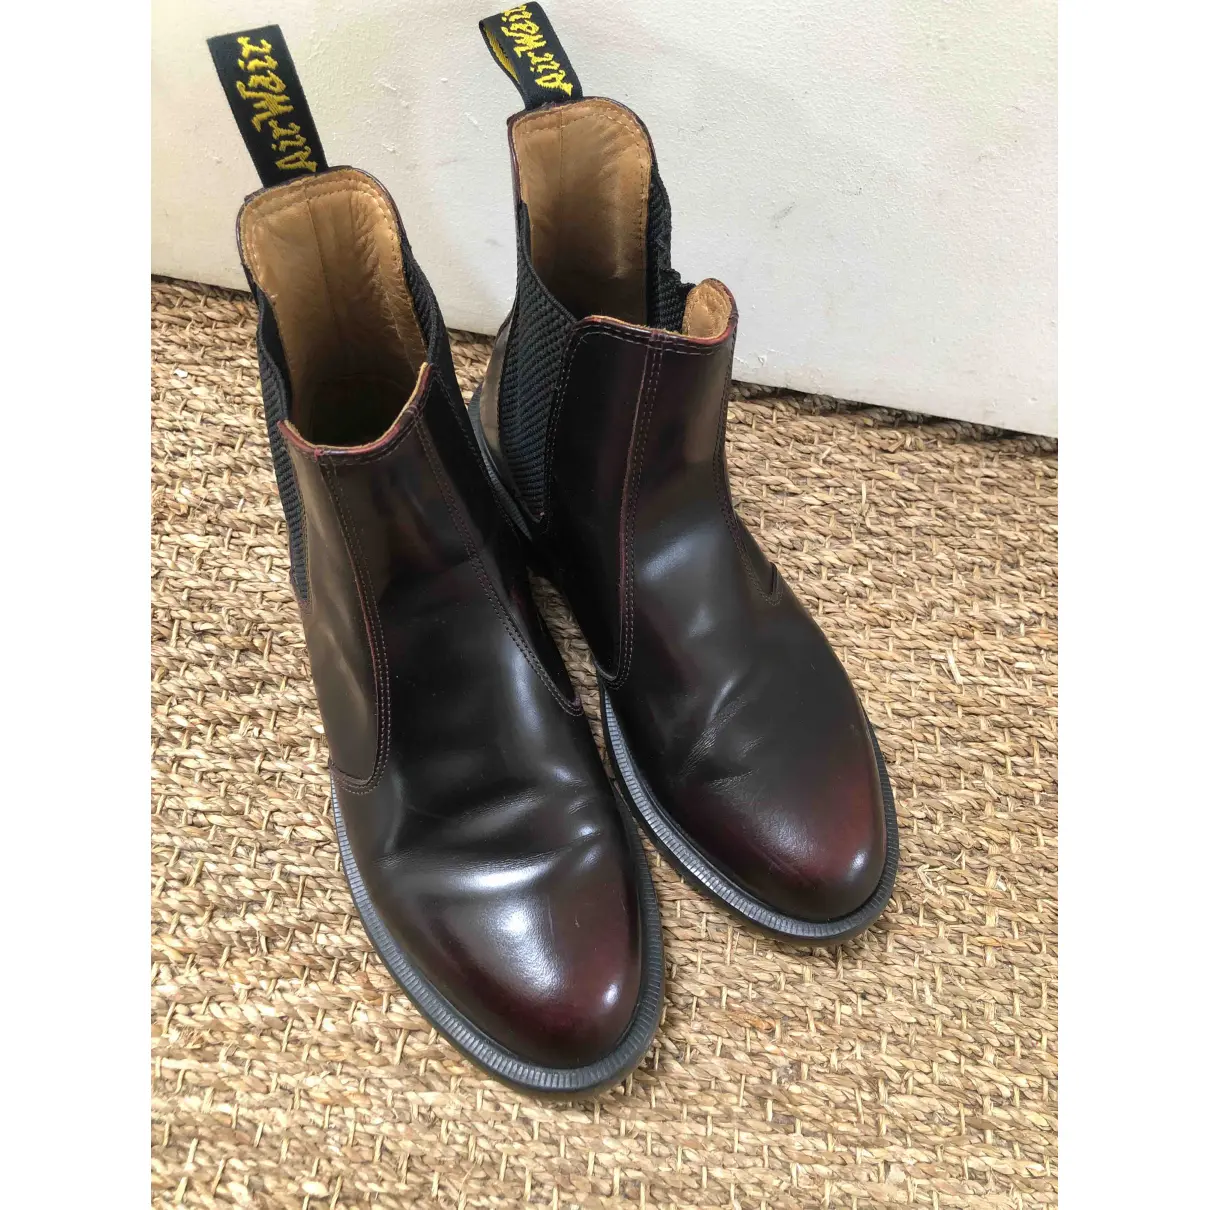 Buy Dr. Martens Chelsea leather ankle boots online